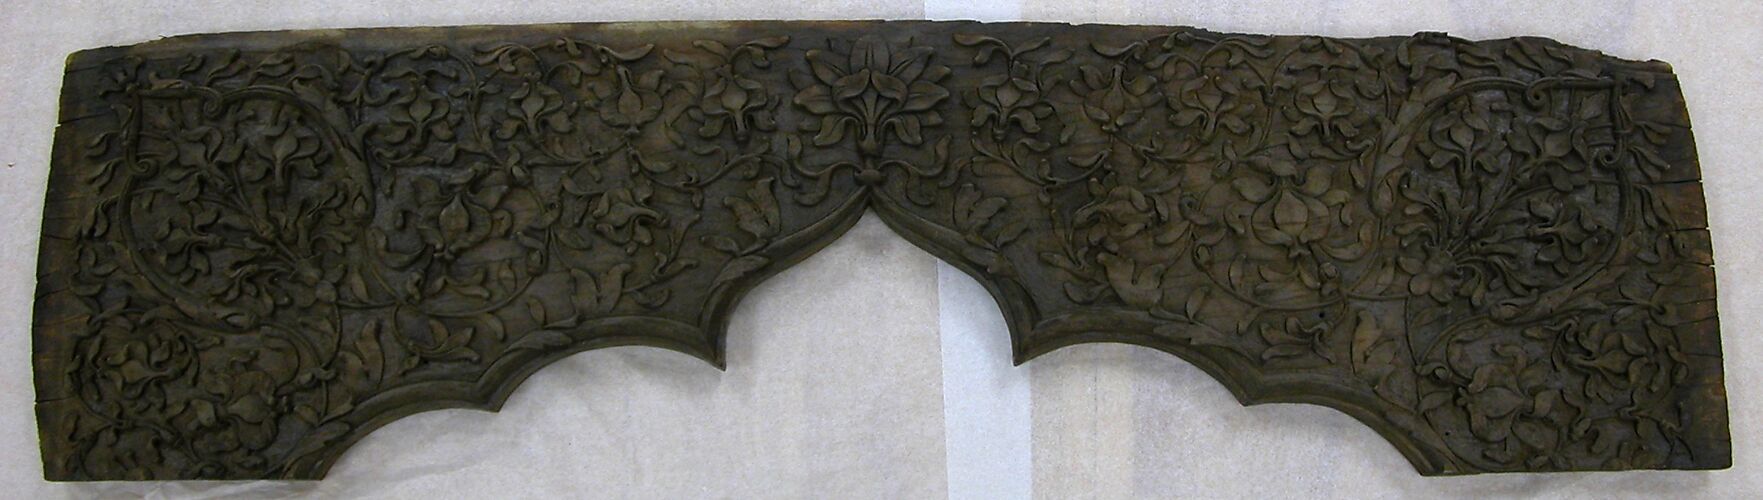 Section of an Archway